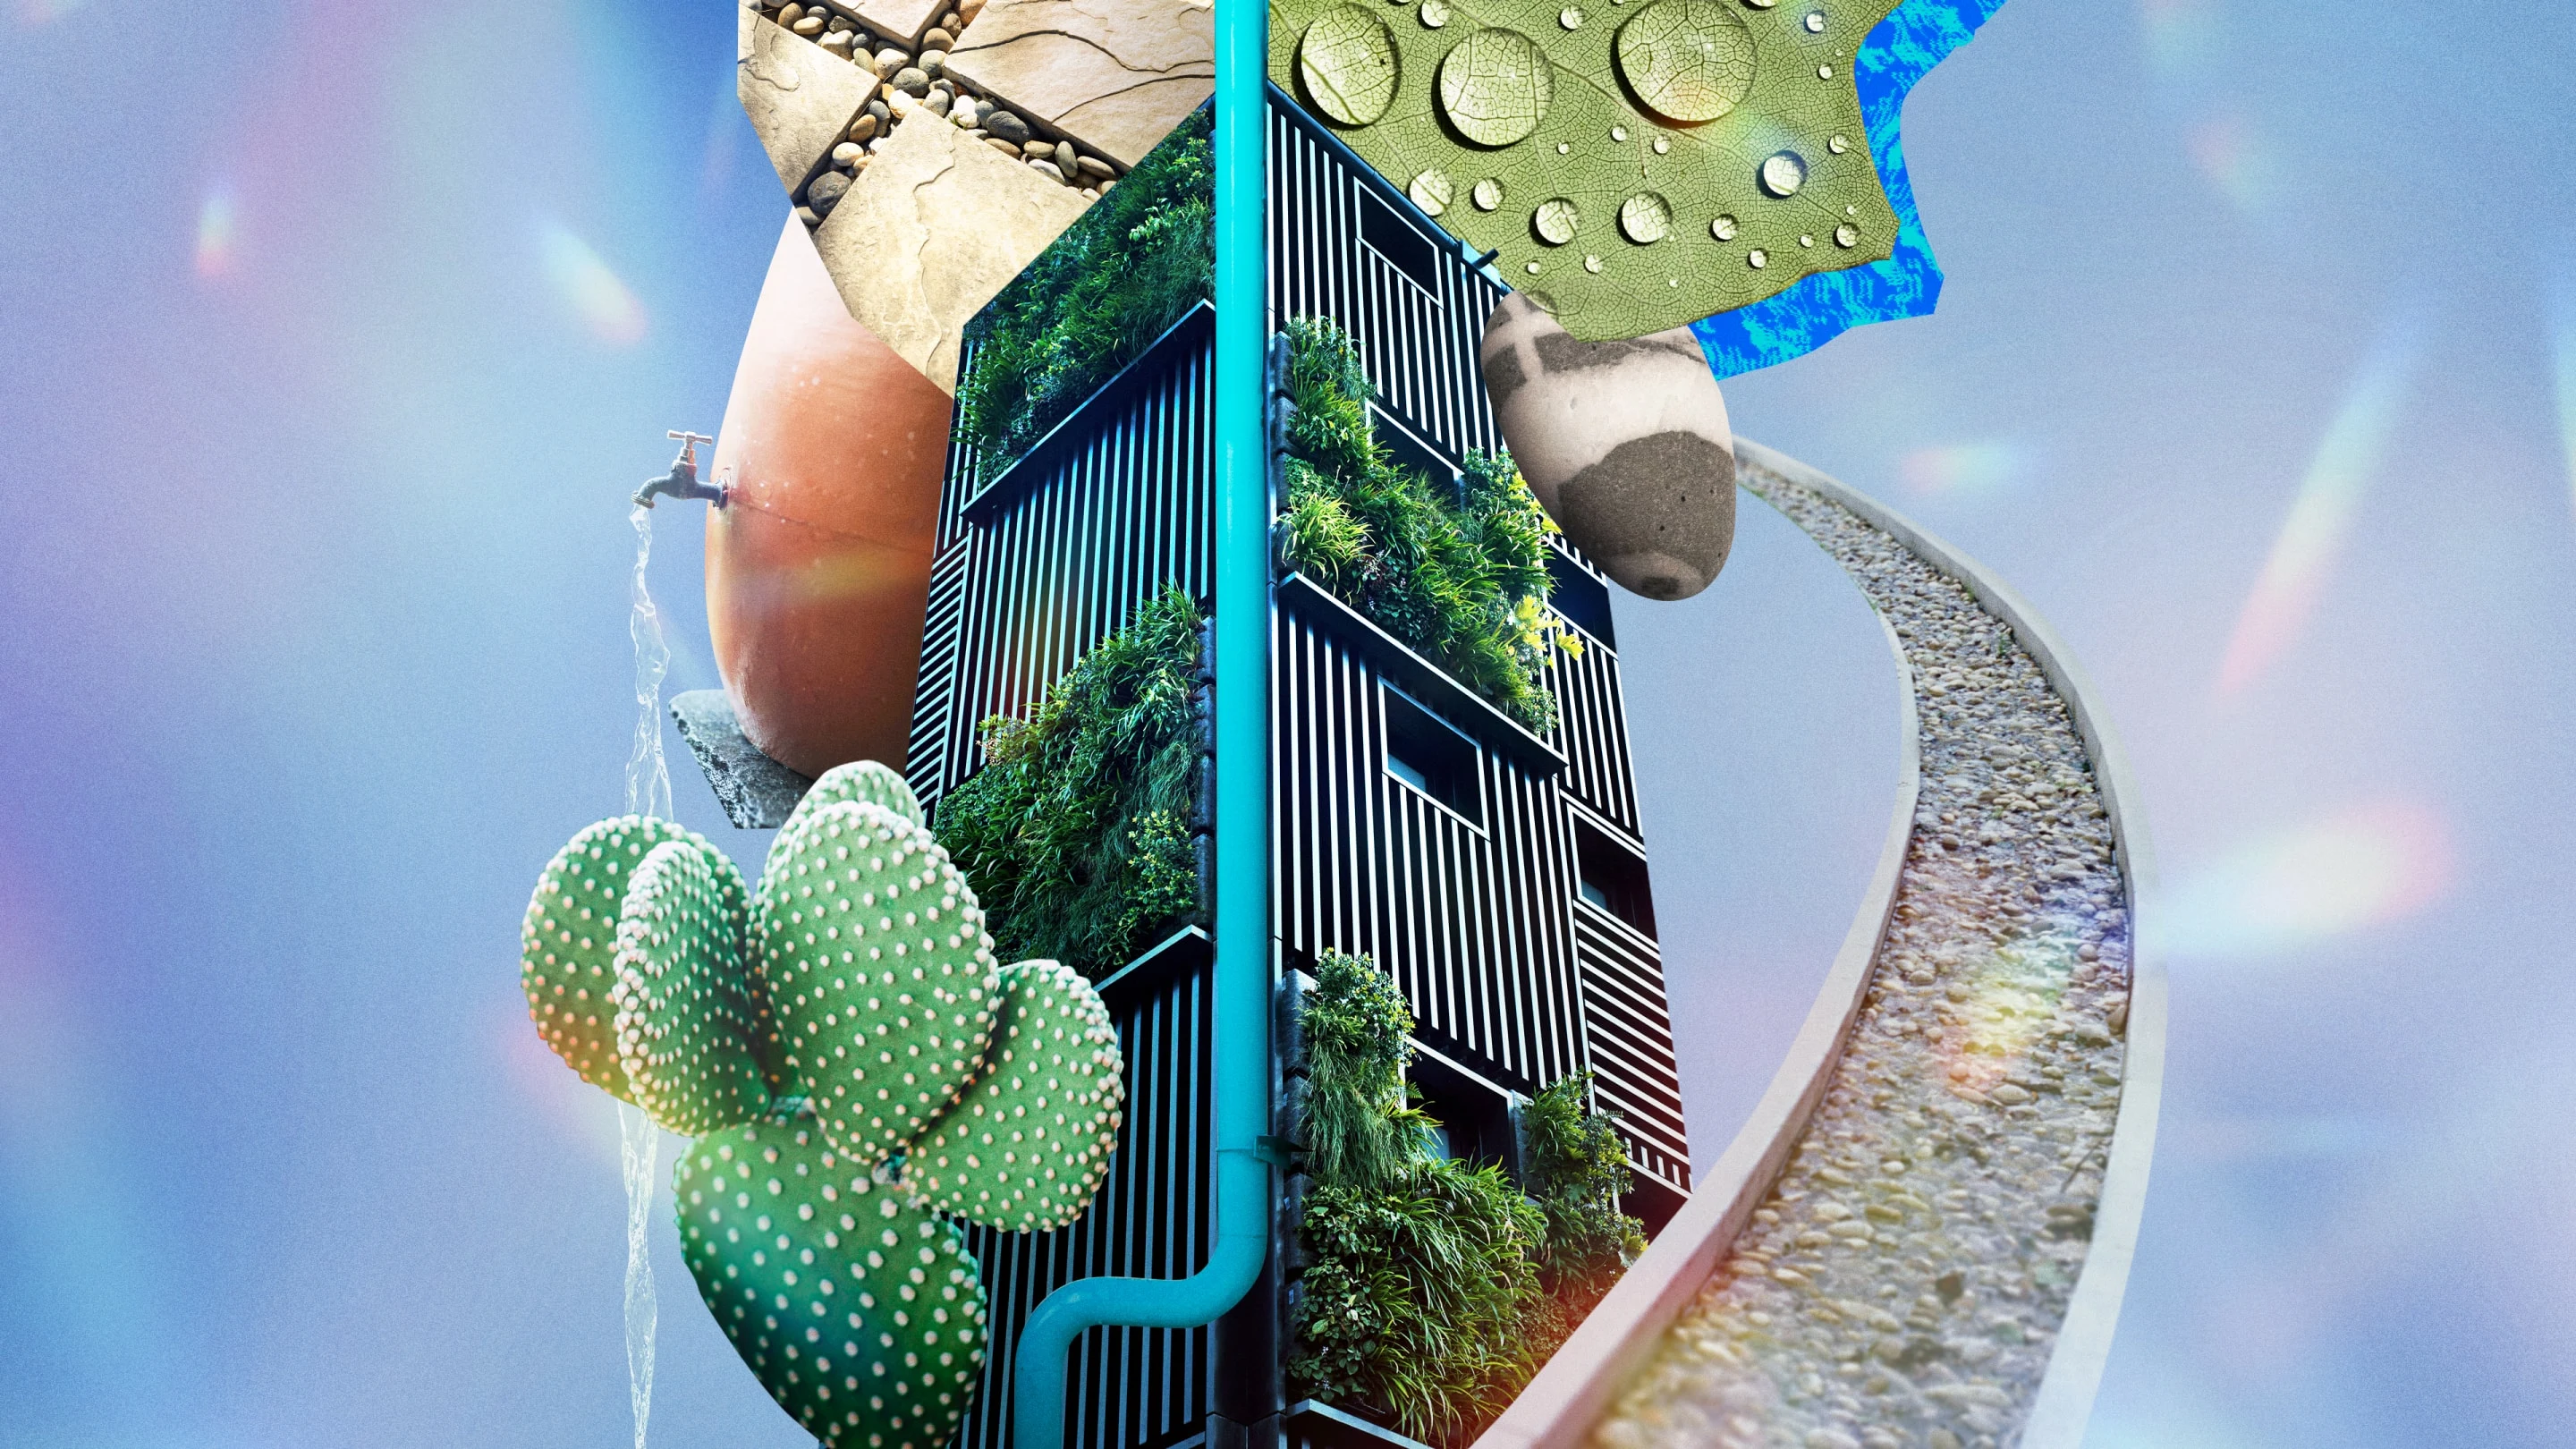 A free-flowing collage featuring water droplets gathering on a leaf, a pebbled pathway, a cactus plant, water flowing from a tap and a vertical garden.